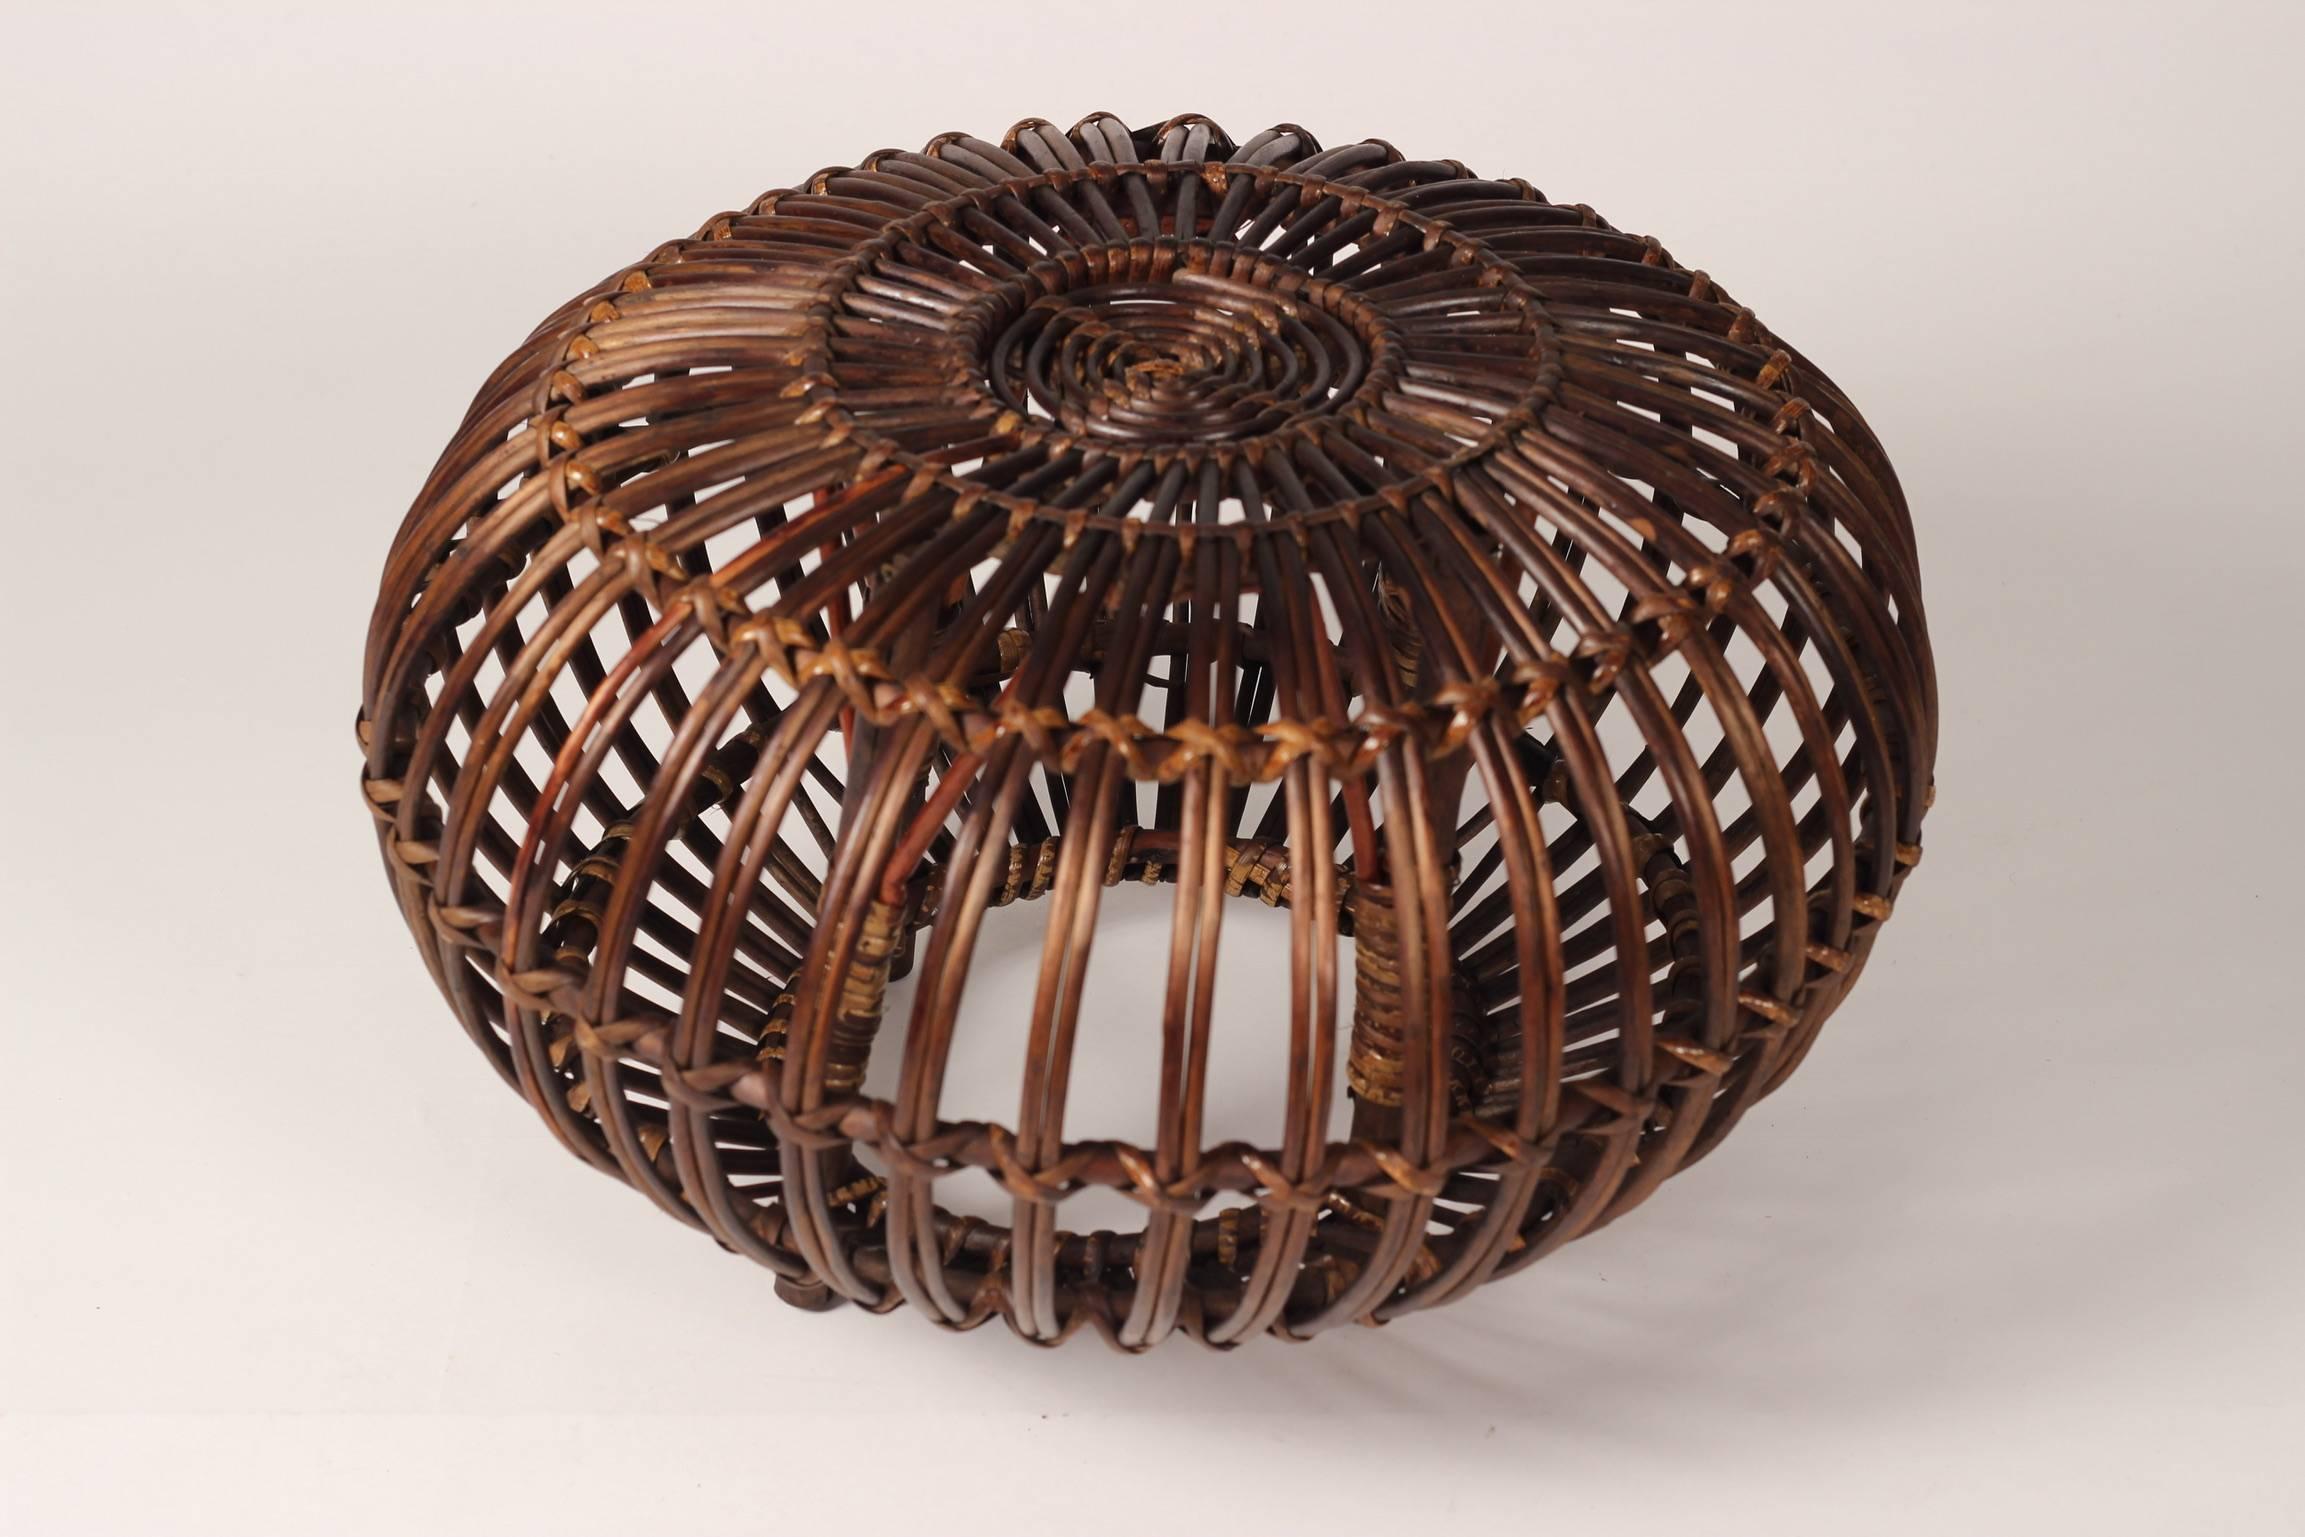 A vintage midcentury round wicker ottoman, stool or side table by designer Franco Albini. A completely versatile piece that adds warmth and a handmade craftsmanship. This is one of five pieces we have.